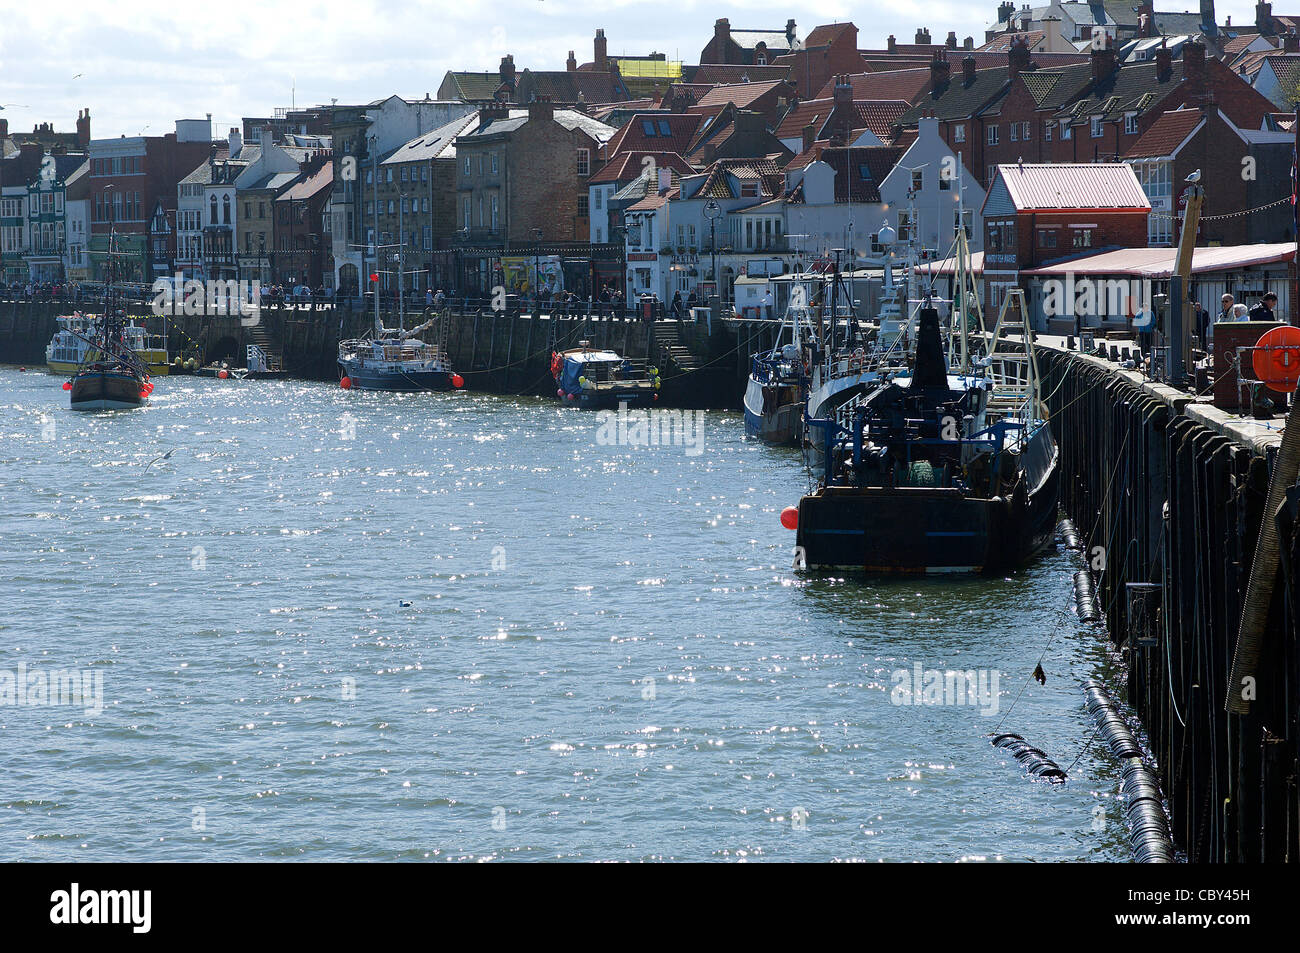 Whitby in N Yorks, England is a flourishing fishing port, Mecca for fish and chip lovers and popular tourist destination. Stock Photo